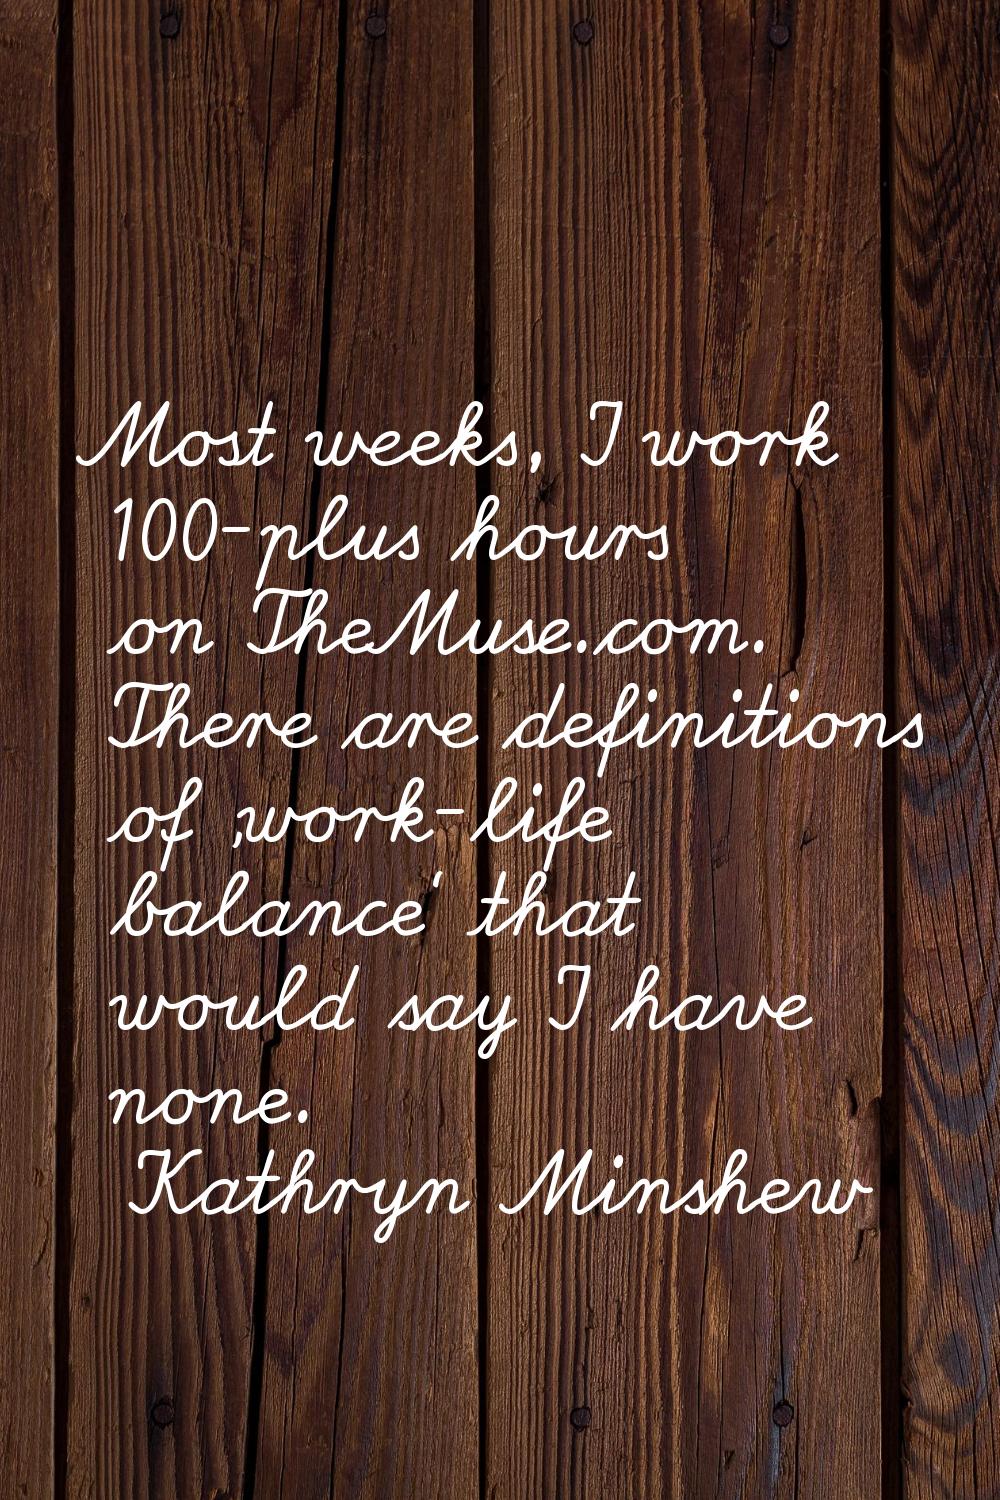 Most weeks, I work 100-plus hours on TheMuse.com. There are definitions of 'work-life balance' that